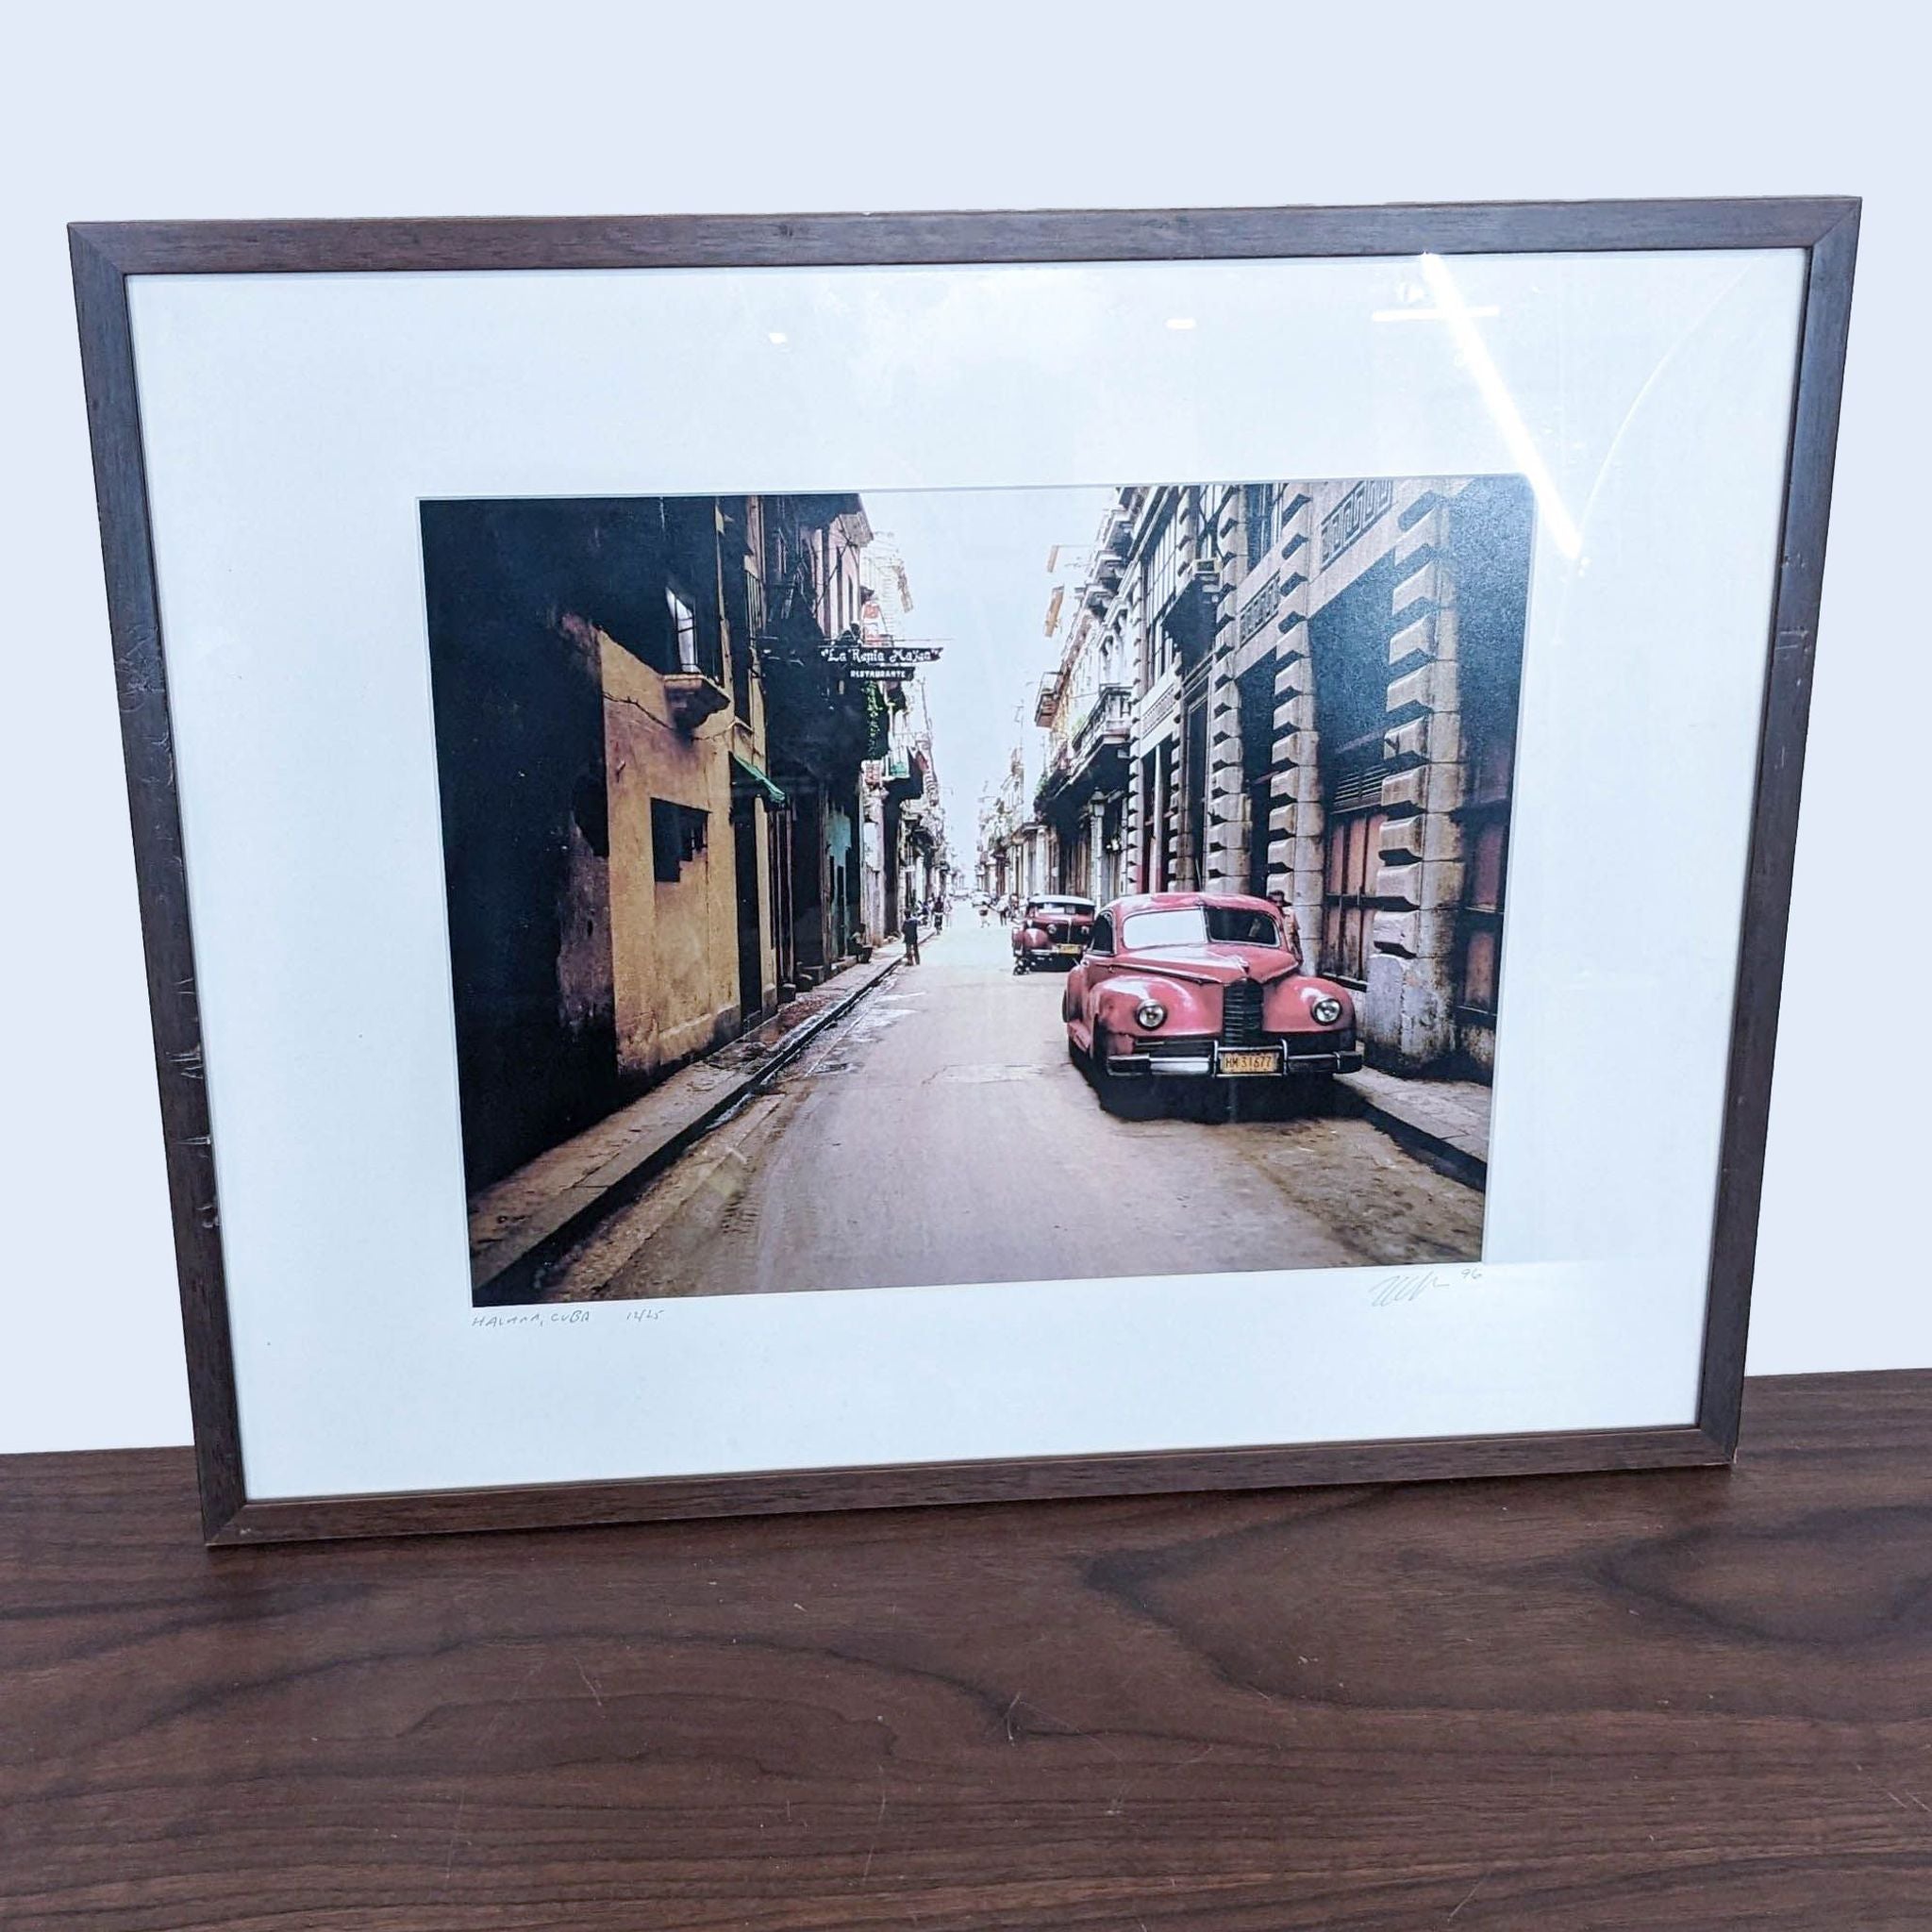 1. Limited edition framed print of a classic red car on a street in Havana, numbered 12/25 by Reperch.